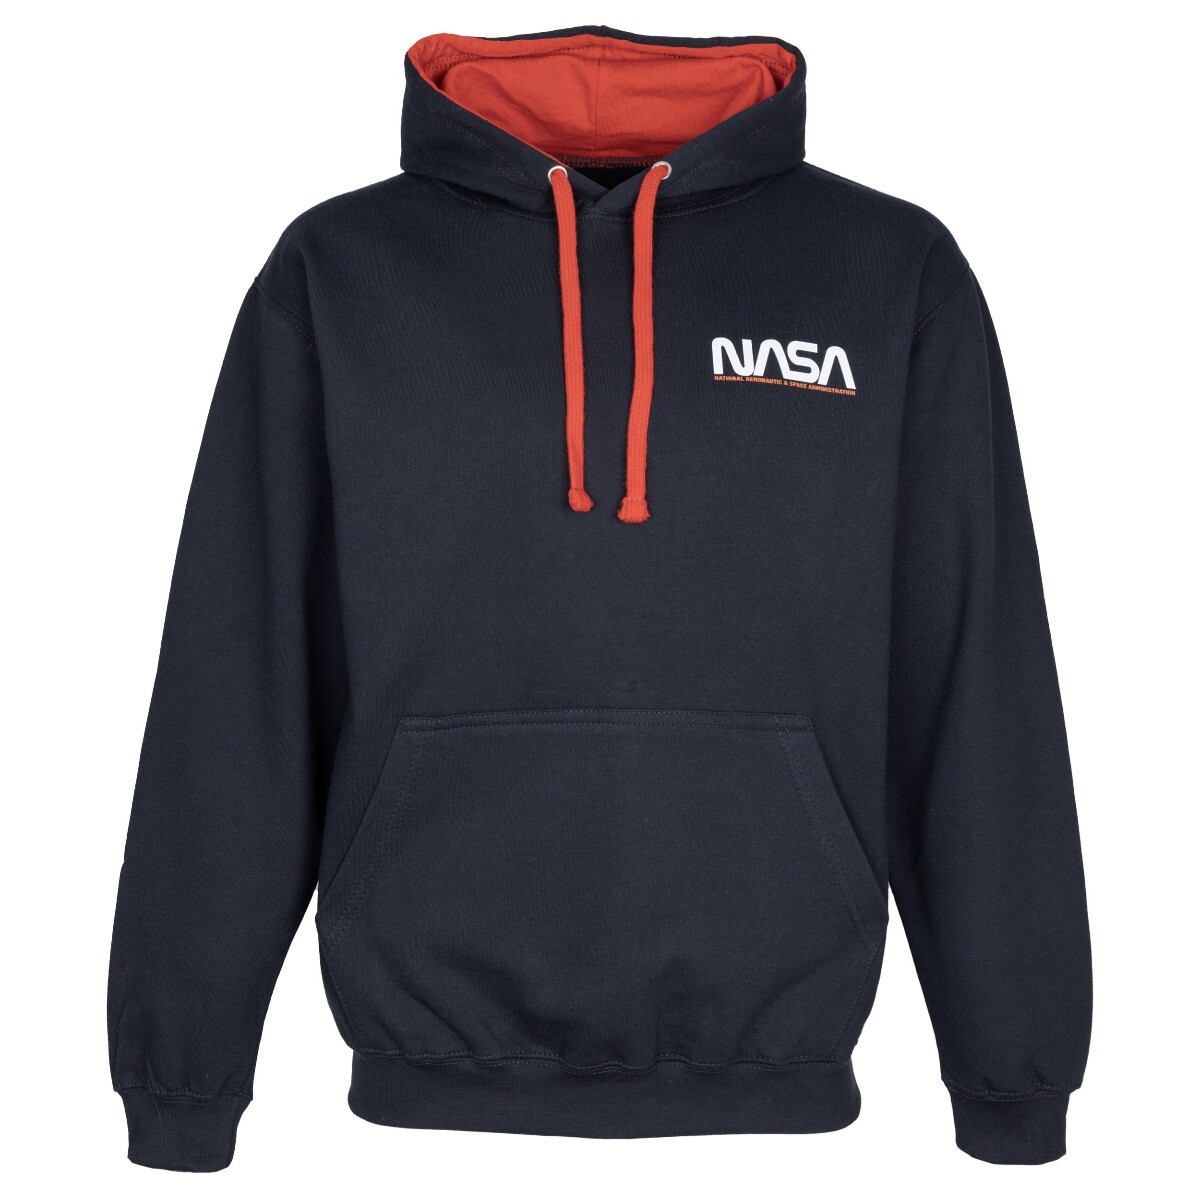 NASA Contrast Hoodie Scouts Sections